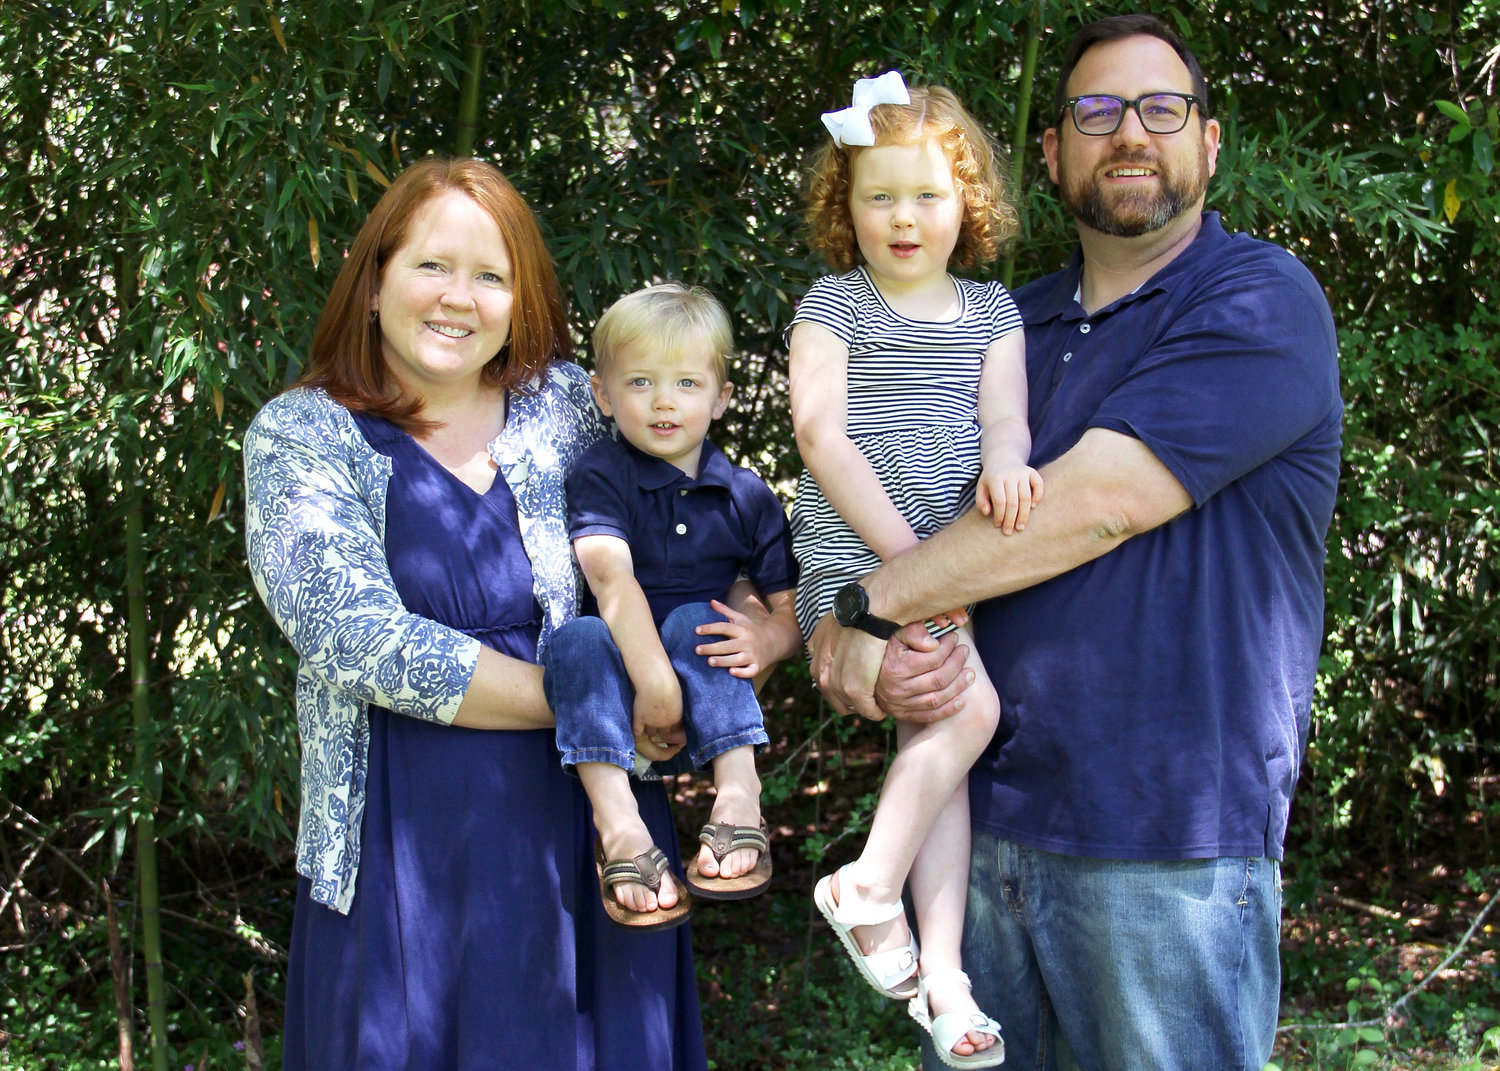 John Blackmon, his wife Cheryl, and their two children, Lillie Jo and Josiah, are preparing to move to Thailand for their next ministry assignment.